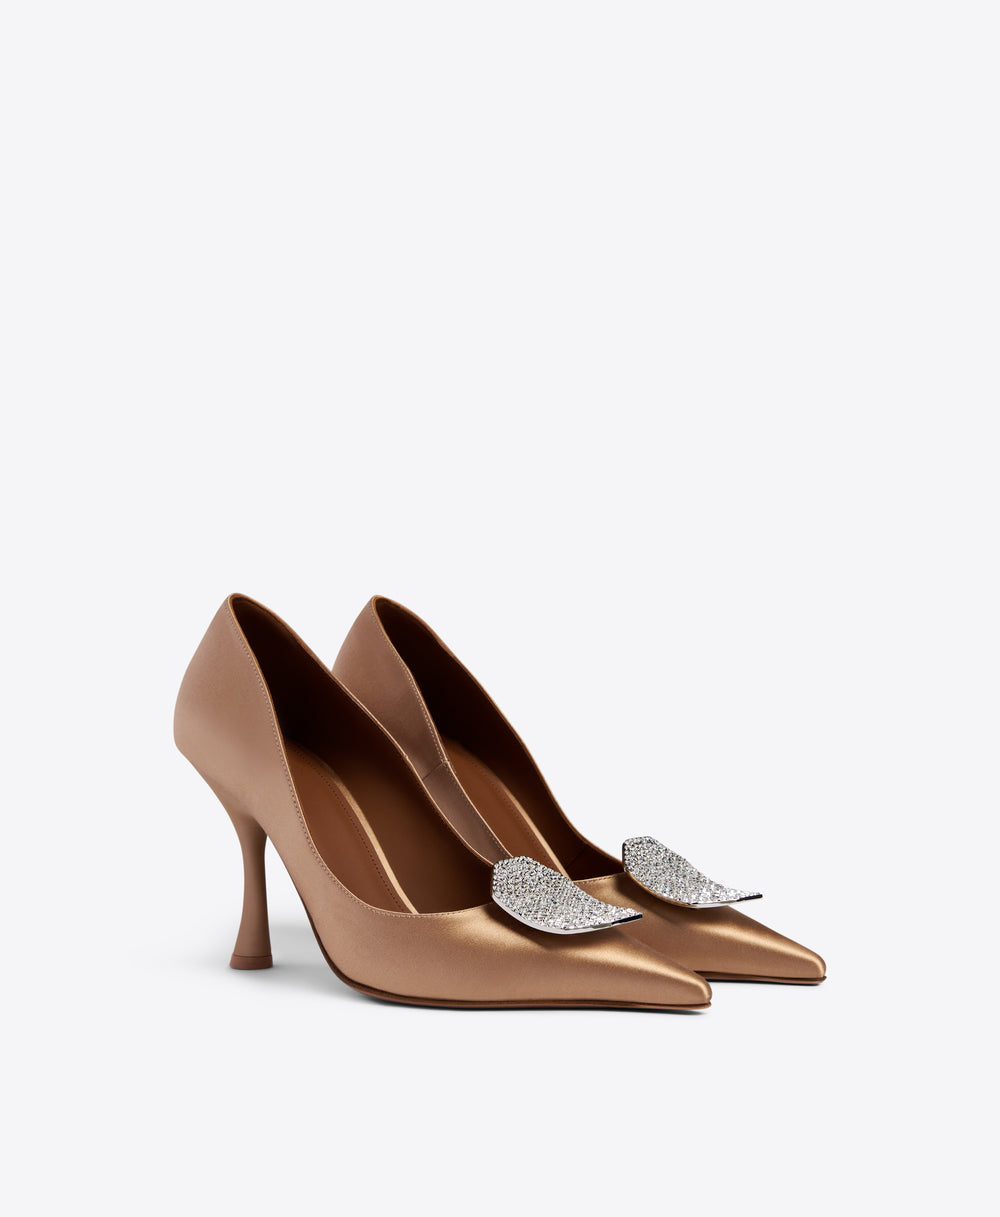 Malone Souliers Vonn 90mm Sepia Satin Heeled Pumps